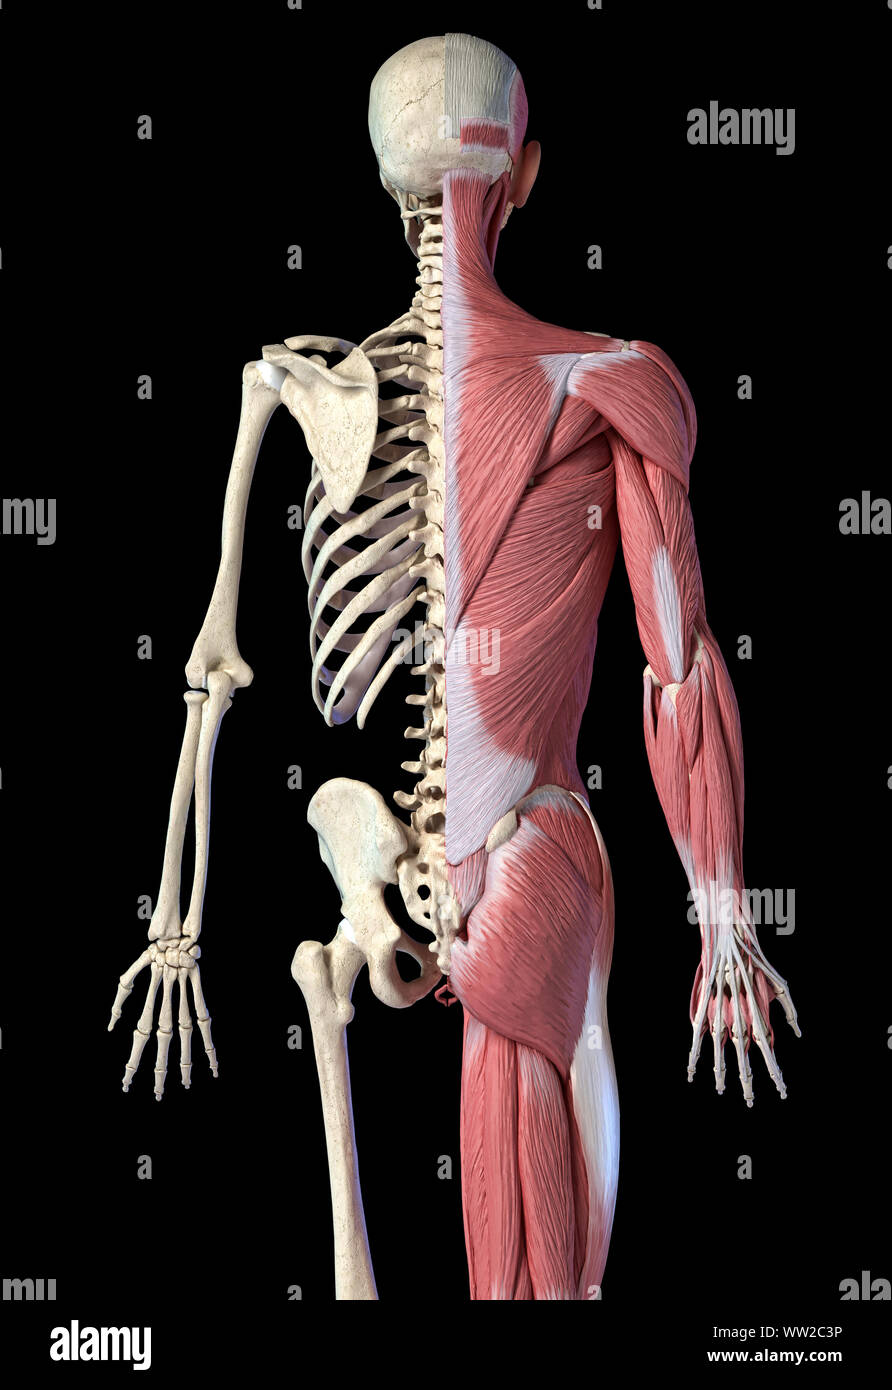 Human male anatomy, 3/4 figure muscular and skeletal systems, back view on black background. 3d anatomy illustration. Stock Photo